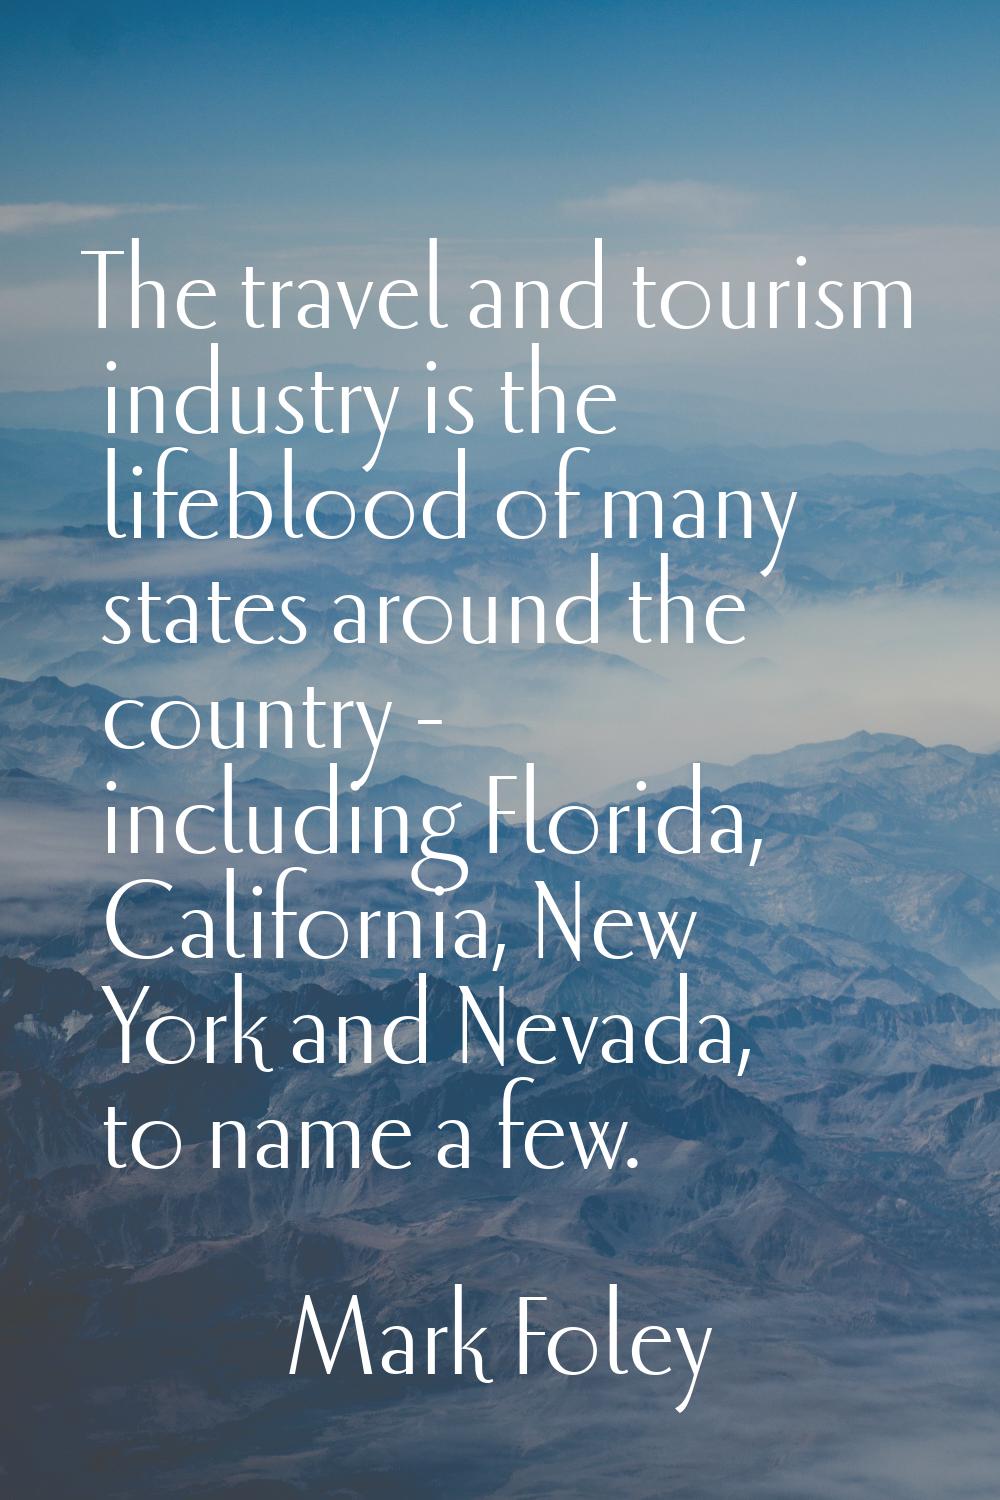 The travel and tourism industry is the lifeblood of many states around the country - including Flor